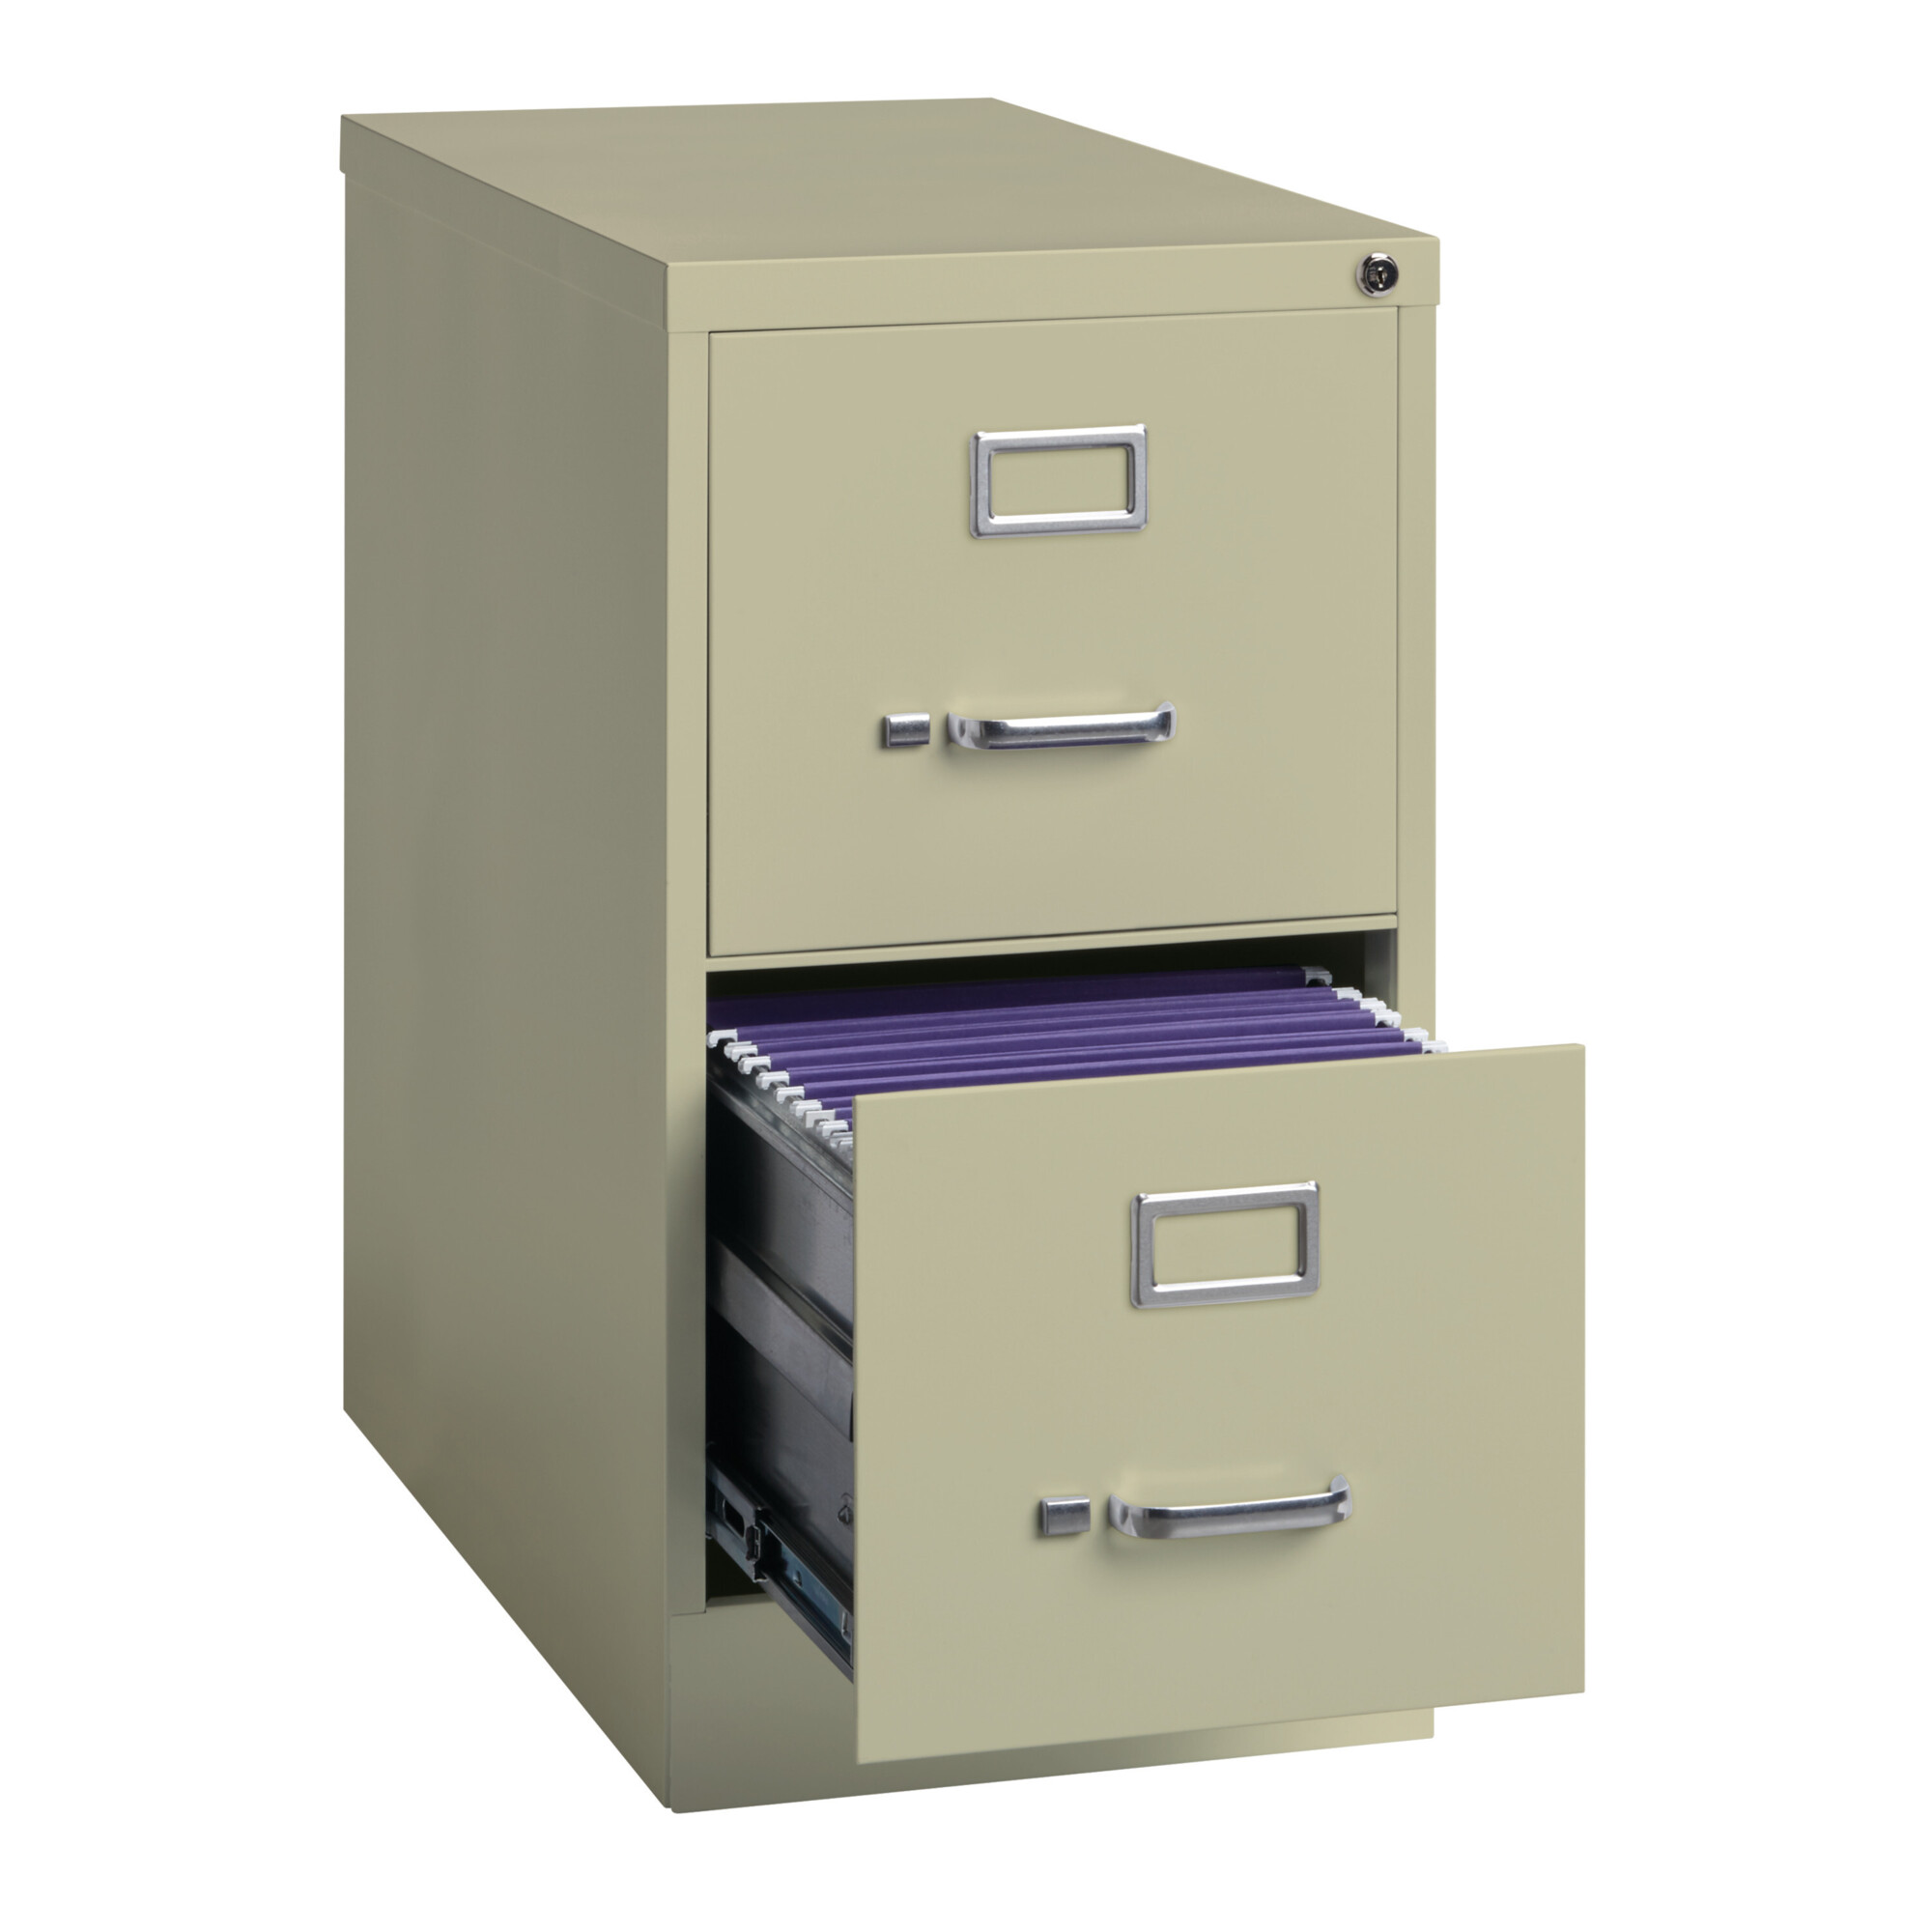 Hirsh Industries, 2 Drawer Letter W File Cabinet, Commercial Grade, Width 15 in, Depth 25 in, Height 28.375 in, Model 14409